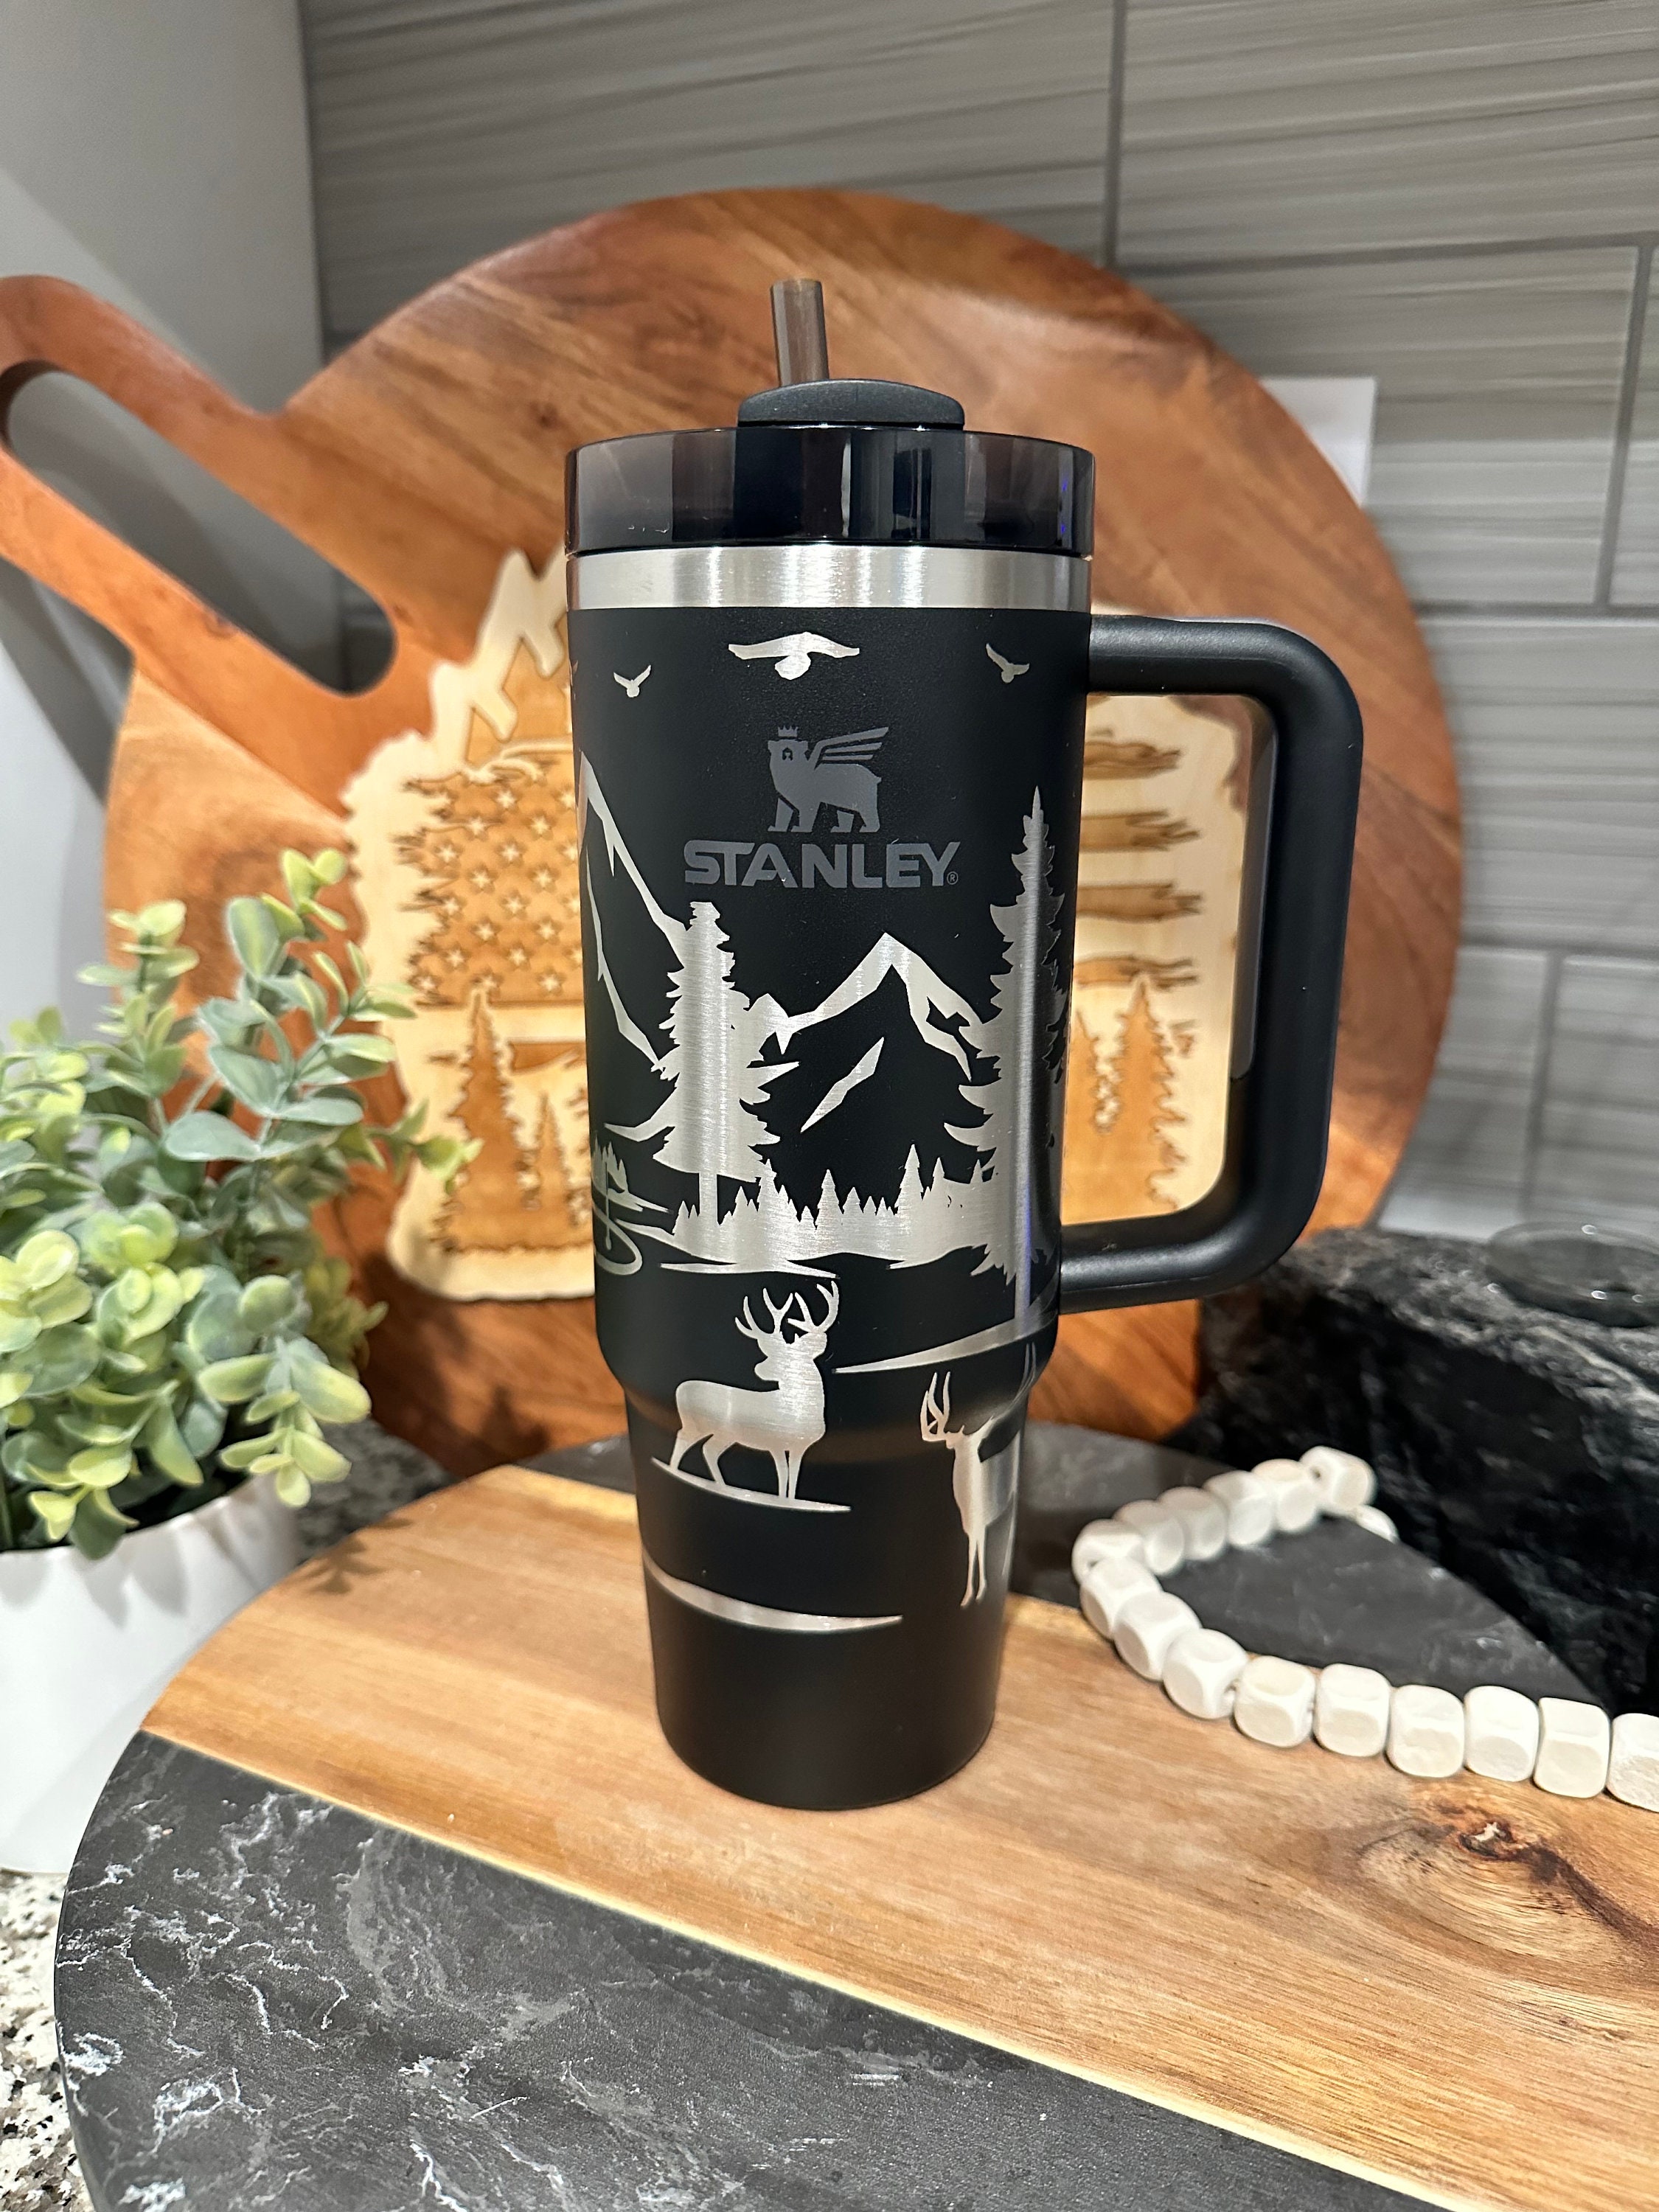 30oz Engraved Stanley Cup Tumbler with Handle – Pixels and Wood